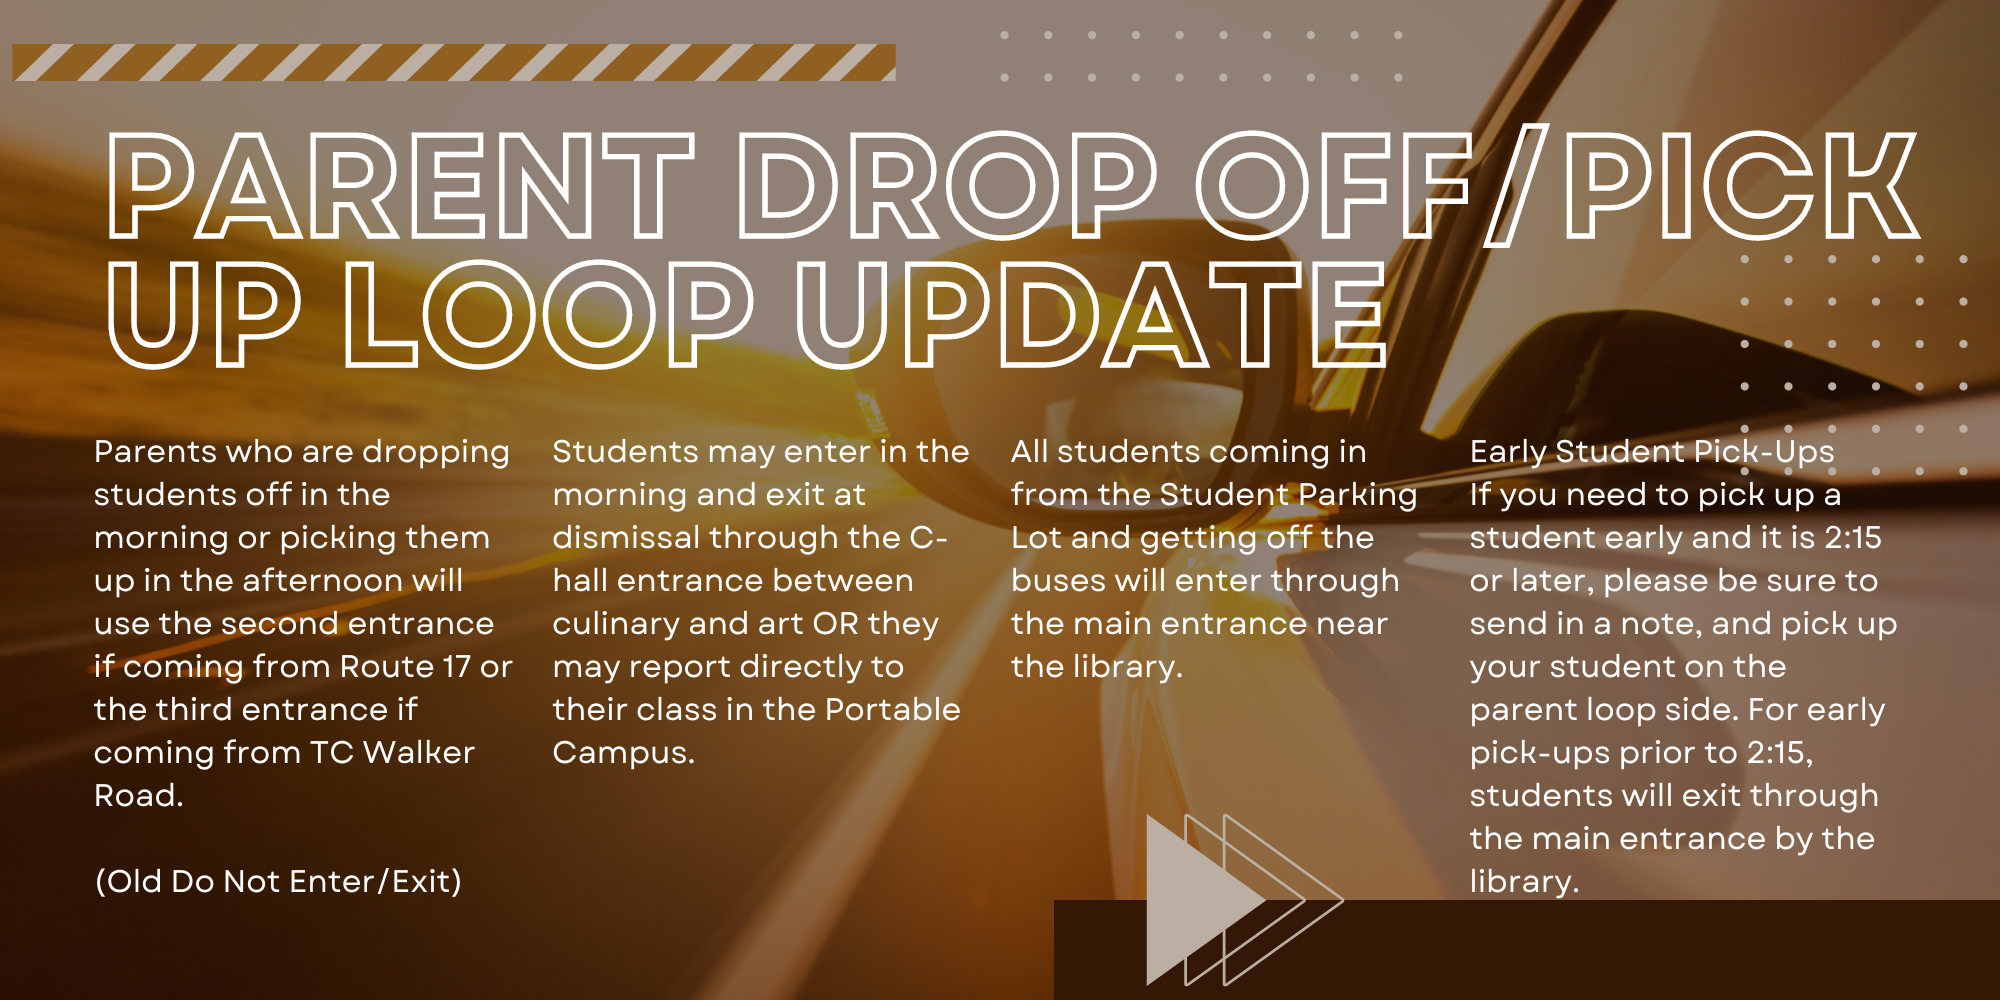 Parent Drop Off/Pick Up Loop Update. Parents who are dropping students  off in the morning or picking htem up in the afternoon will use the second entrance if coming from Route 17 or the third entrance if coming from TC Walker Road (Do Not Enter/Exit). Students may enter in the morning and exit at dismissal through the C-hall entrance between culinary and art OR they may report directly to their class in the Portable Campus. All students coming in from the student parking lot and getting off of the buses will enter through the main entrance near the library.